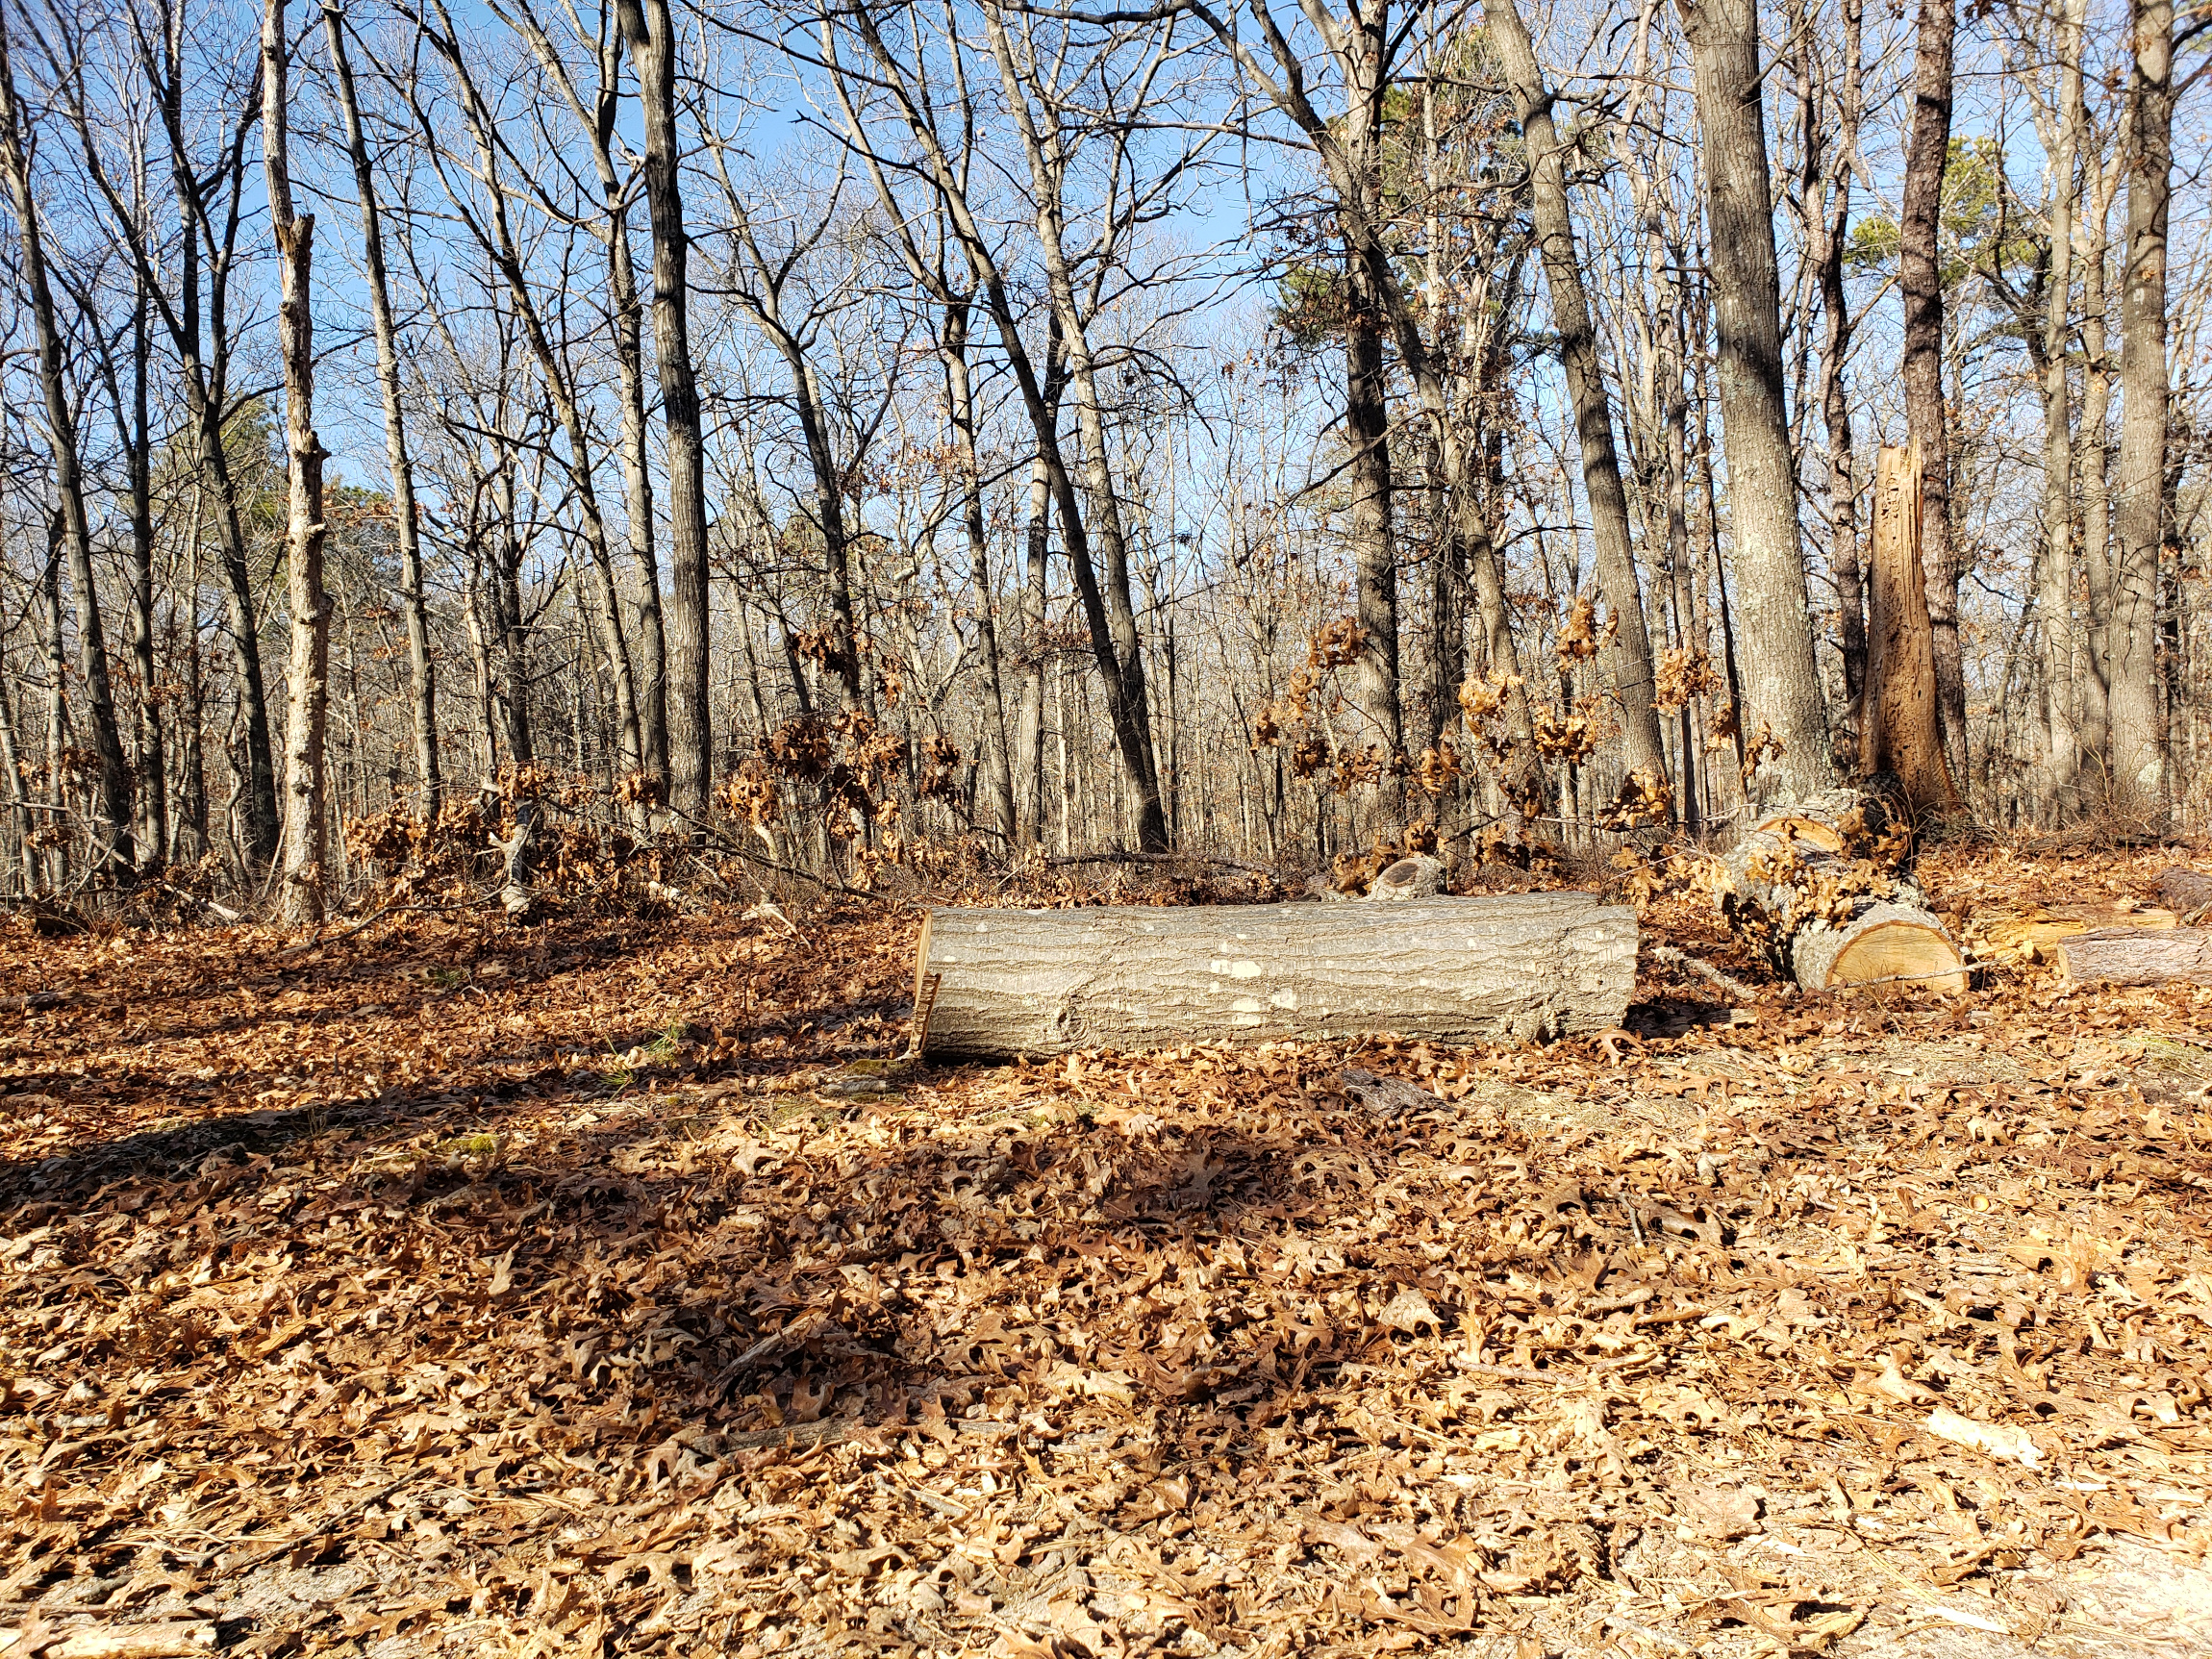 Finding a Seat in The Pine Barrens